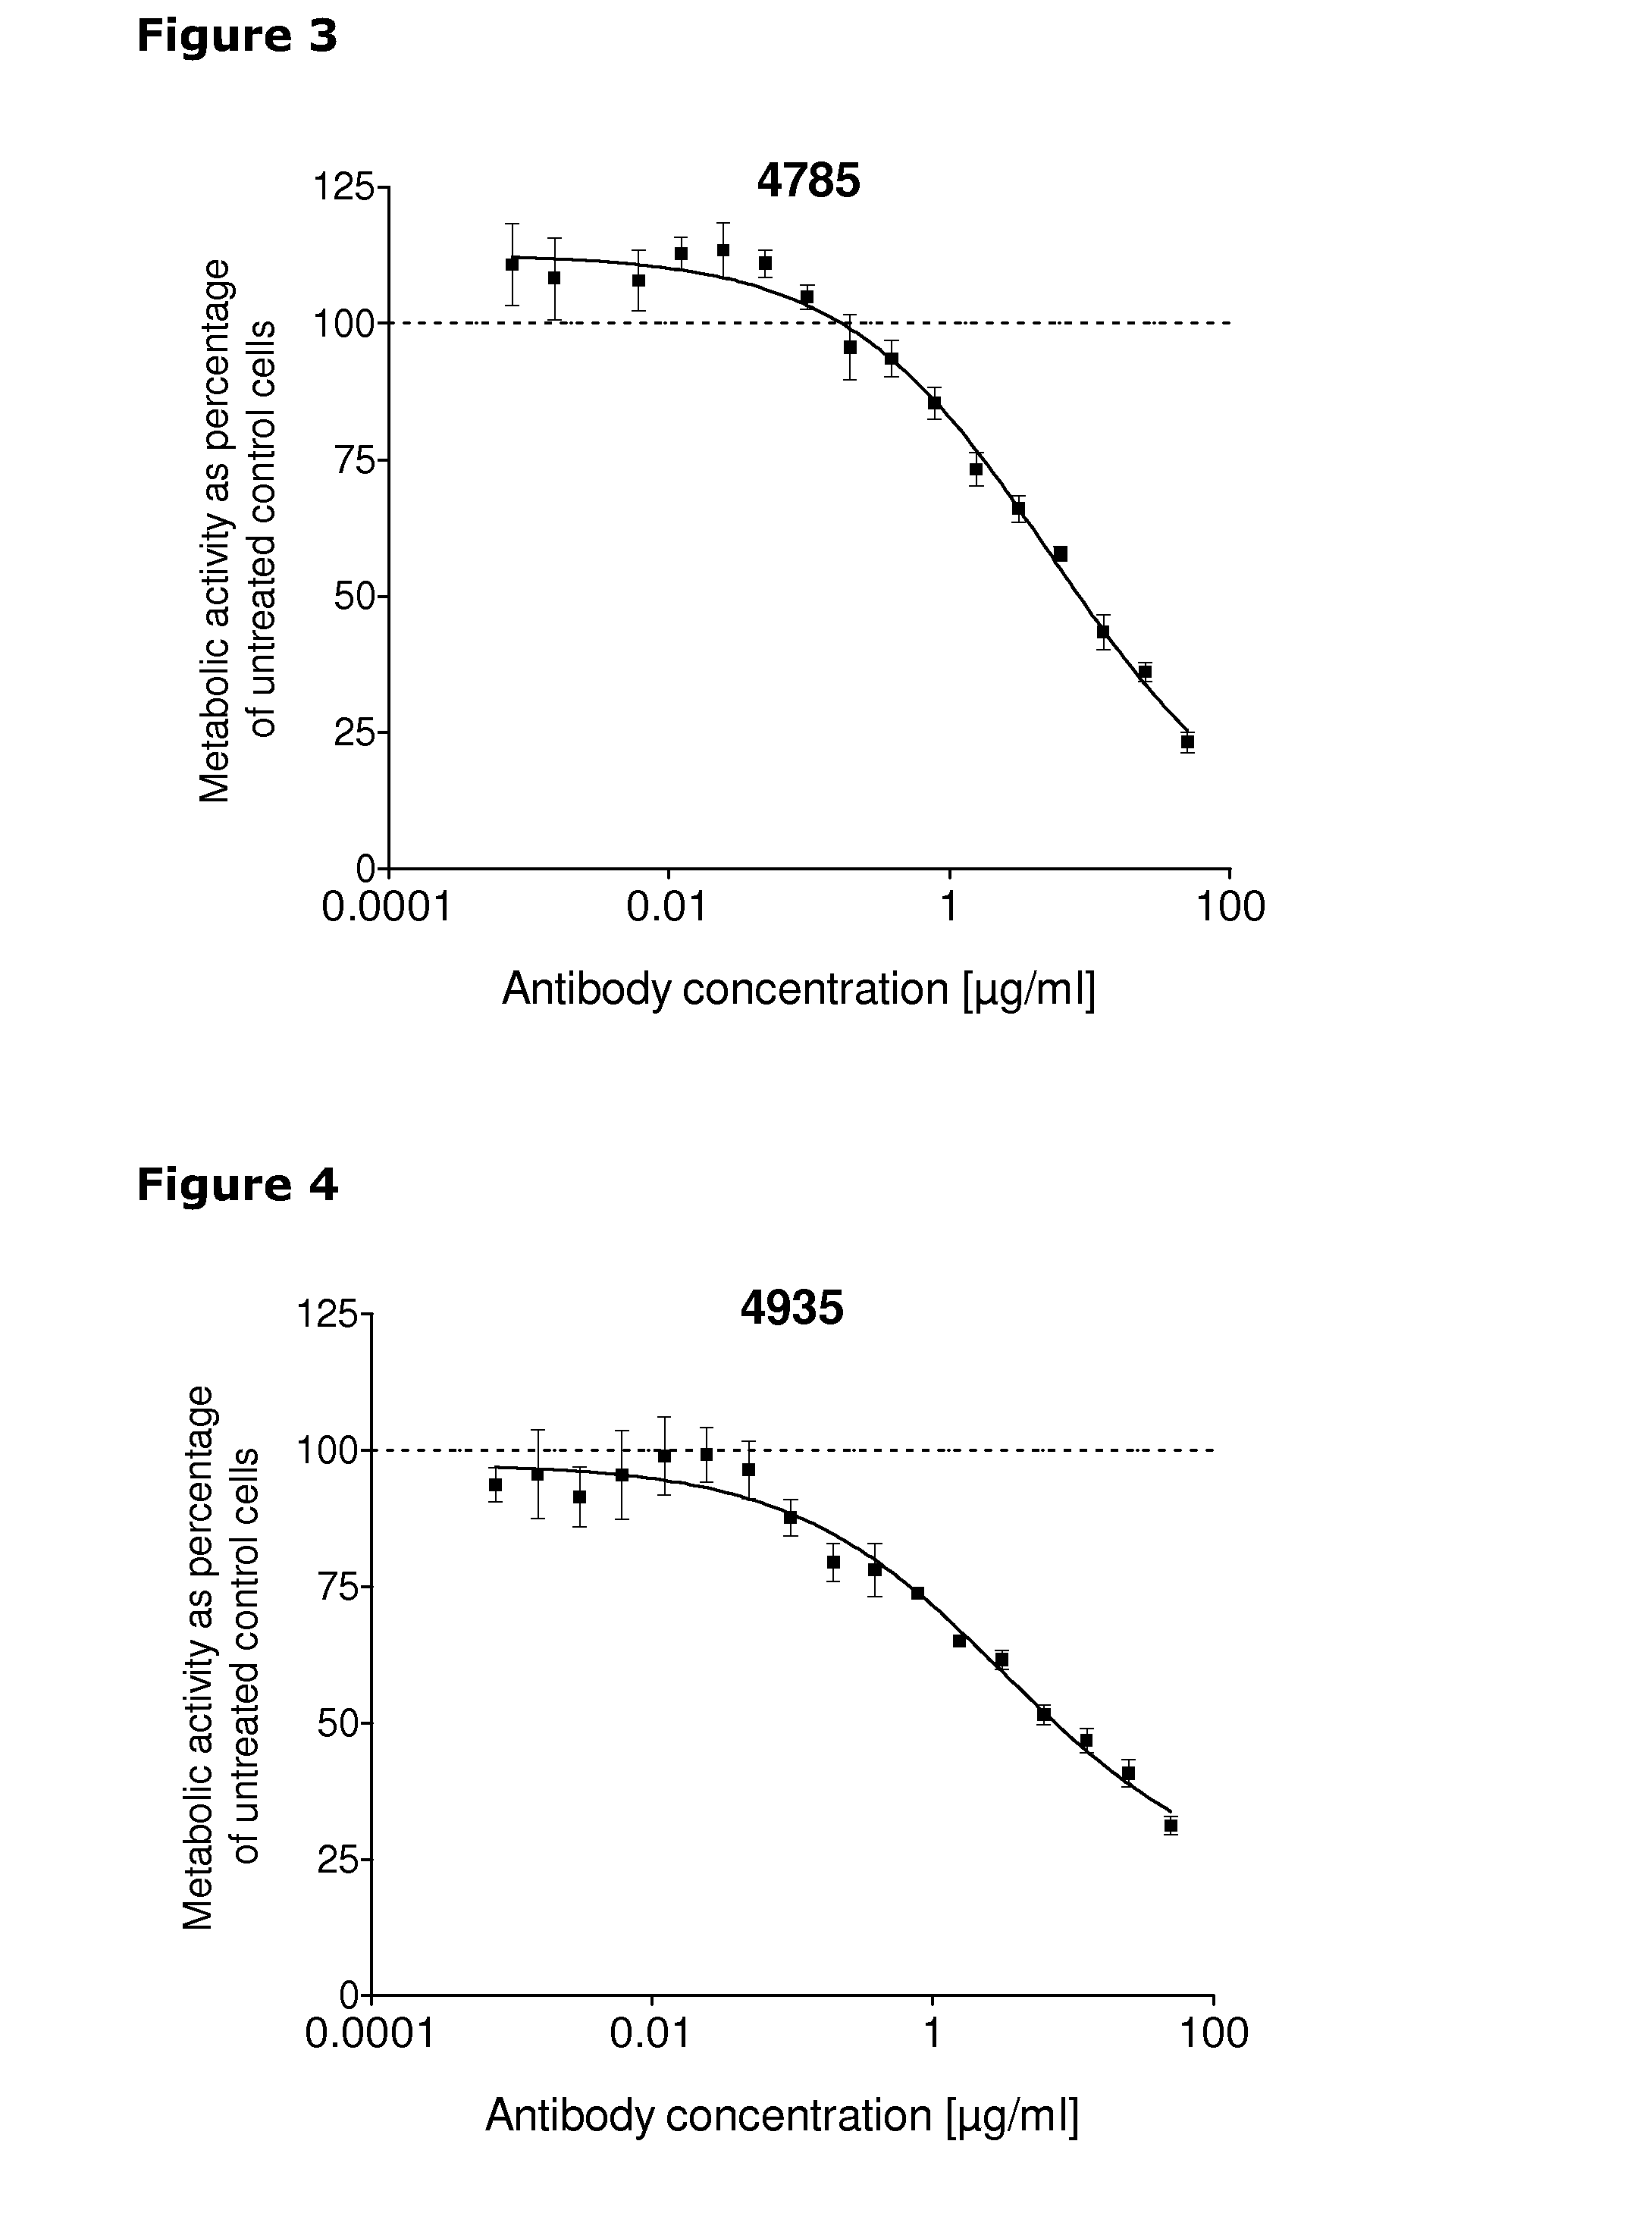 Anti-her3 antibodies and compositions